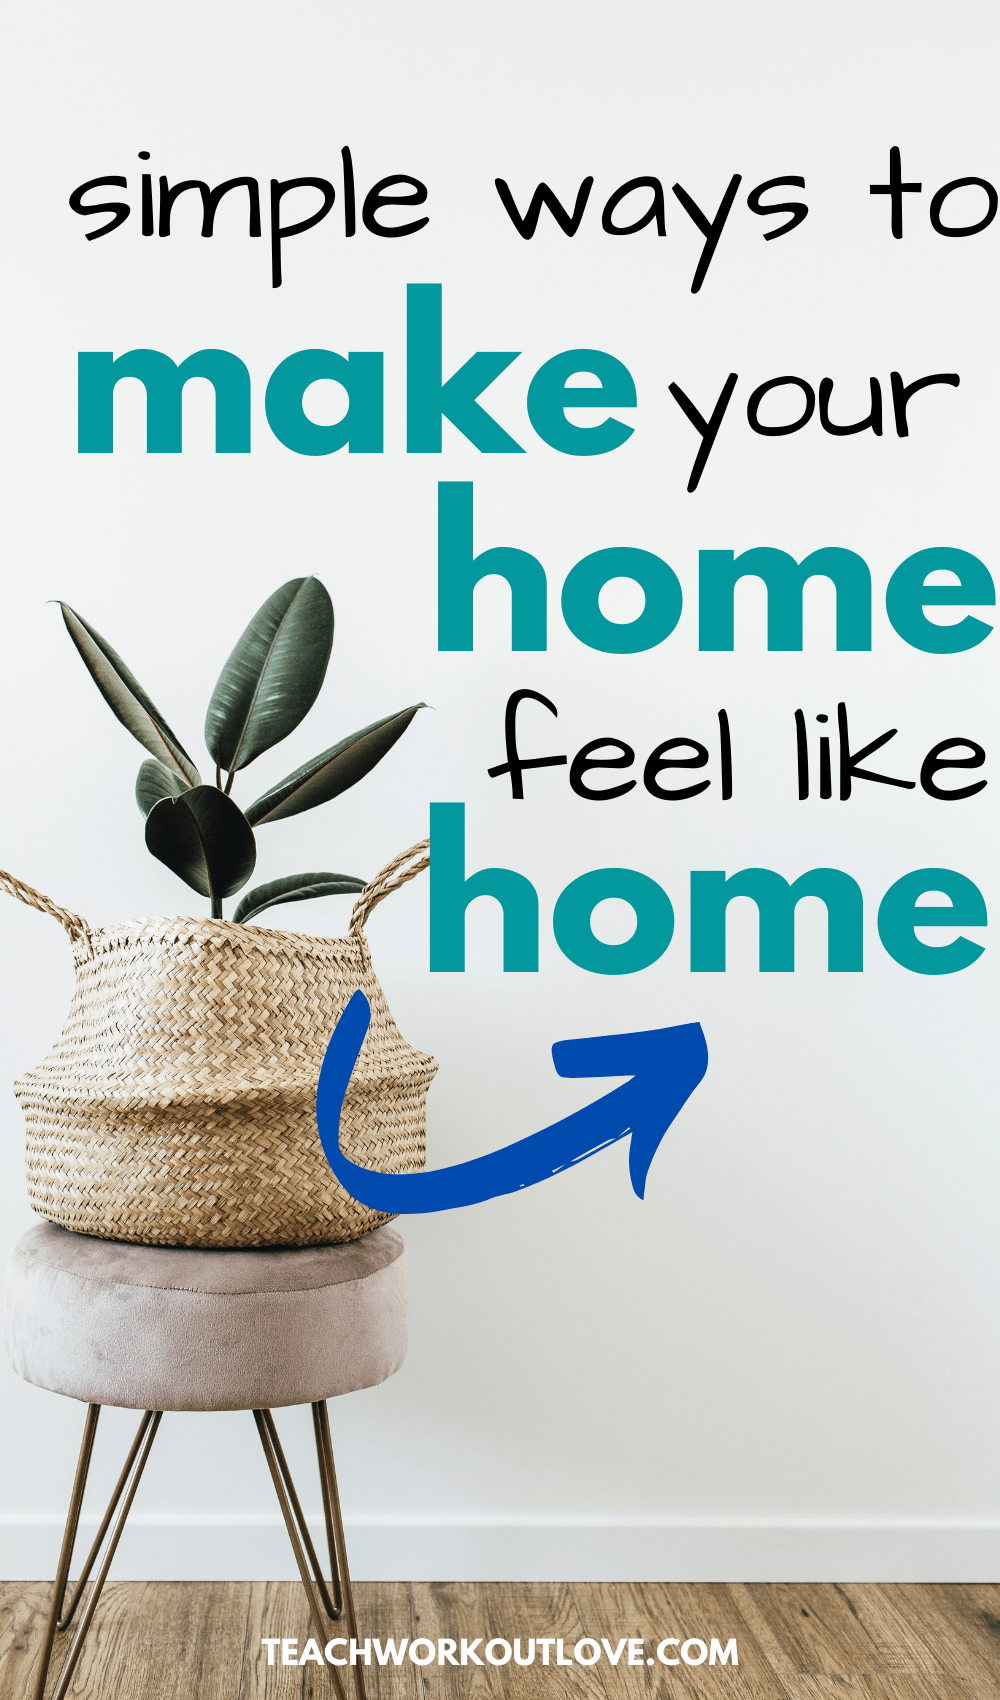 Your home should be the place you feel most safe and most comfortable in the entire world. Here's 3 simple tips to make it feel like home.